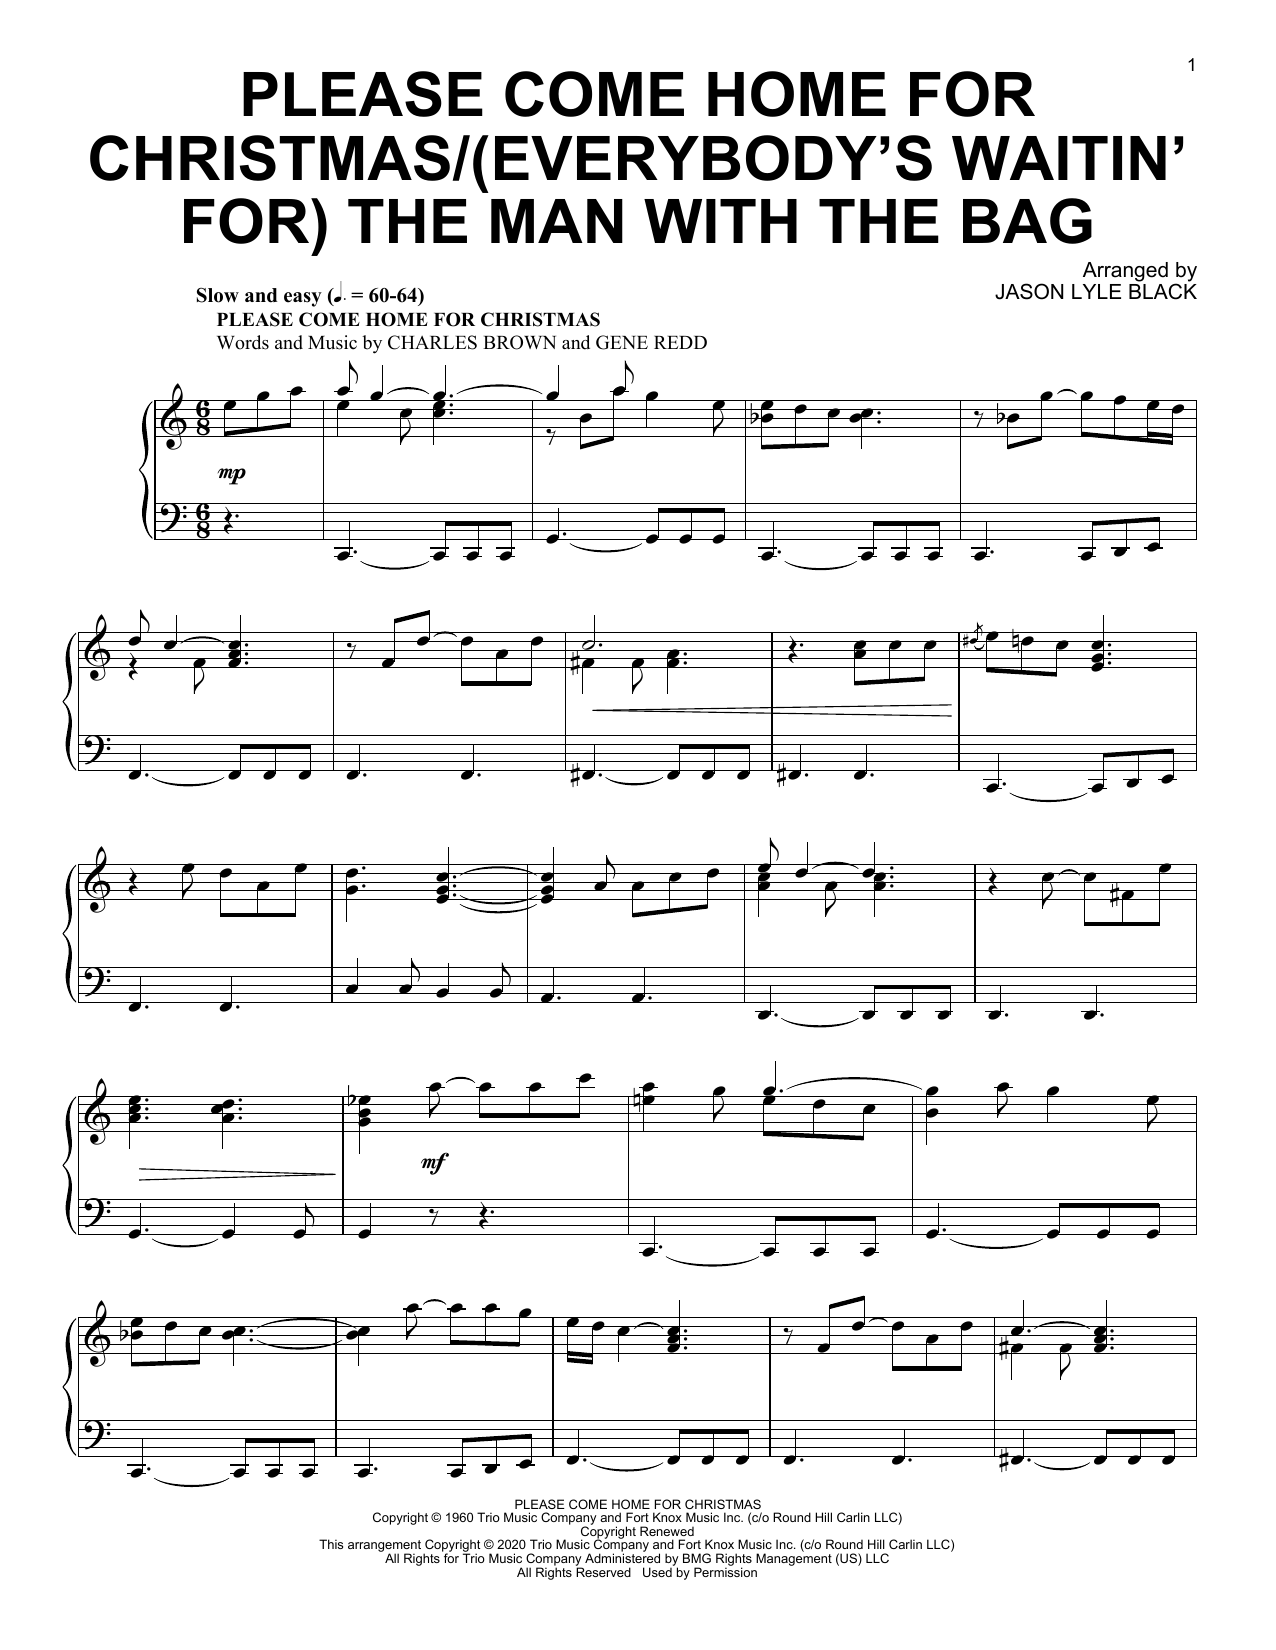 Please Come Home For Christmas/(Everybody's Waitin' For) The Man With The Bag (Piano Solo) von Jason Lyle Black